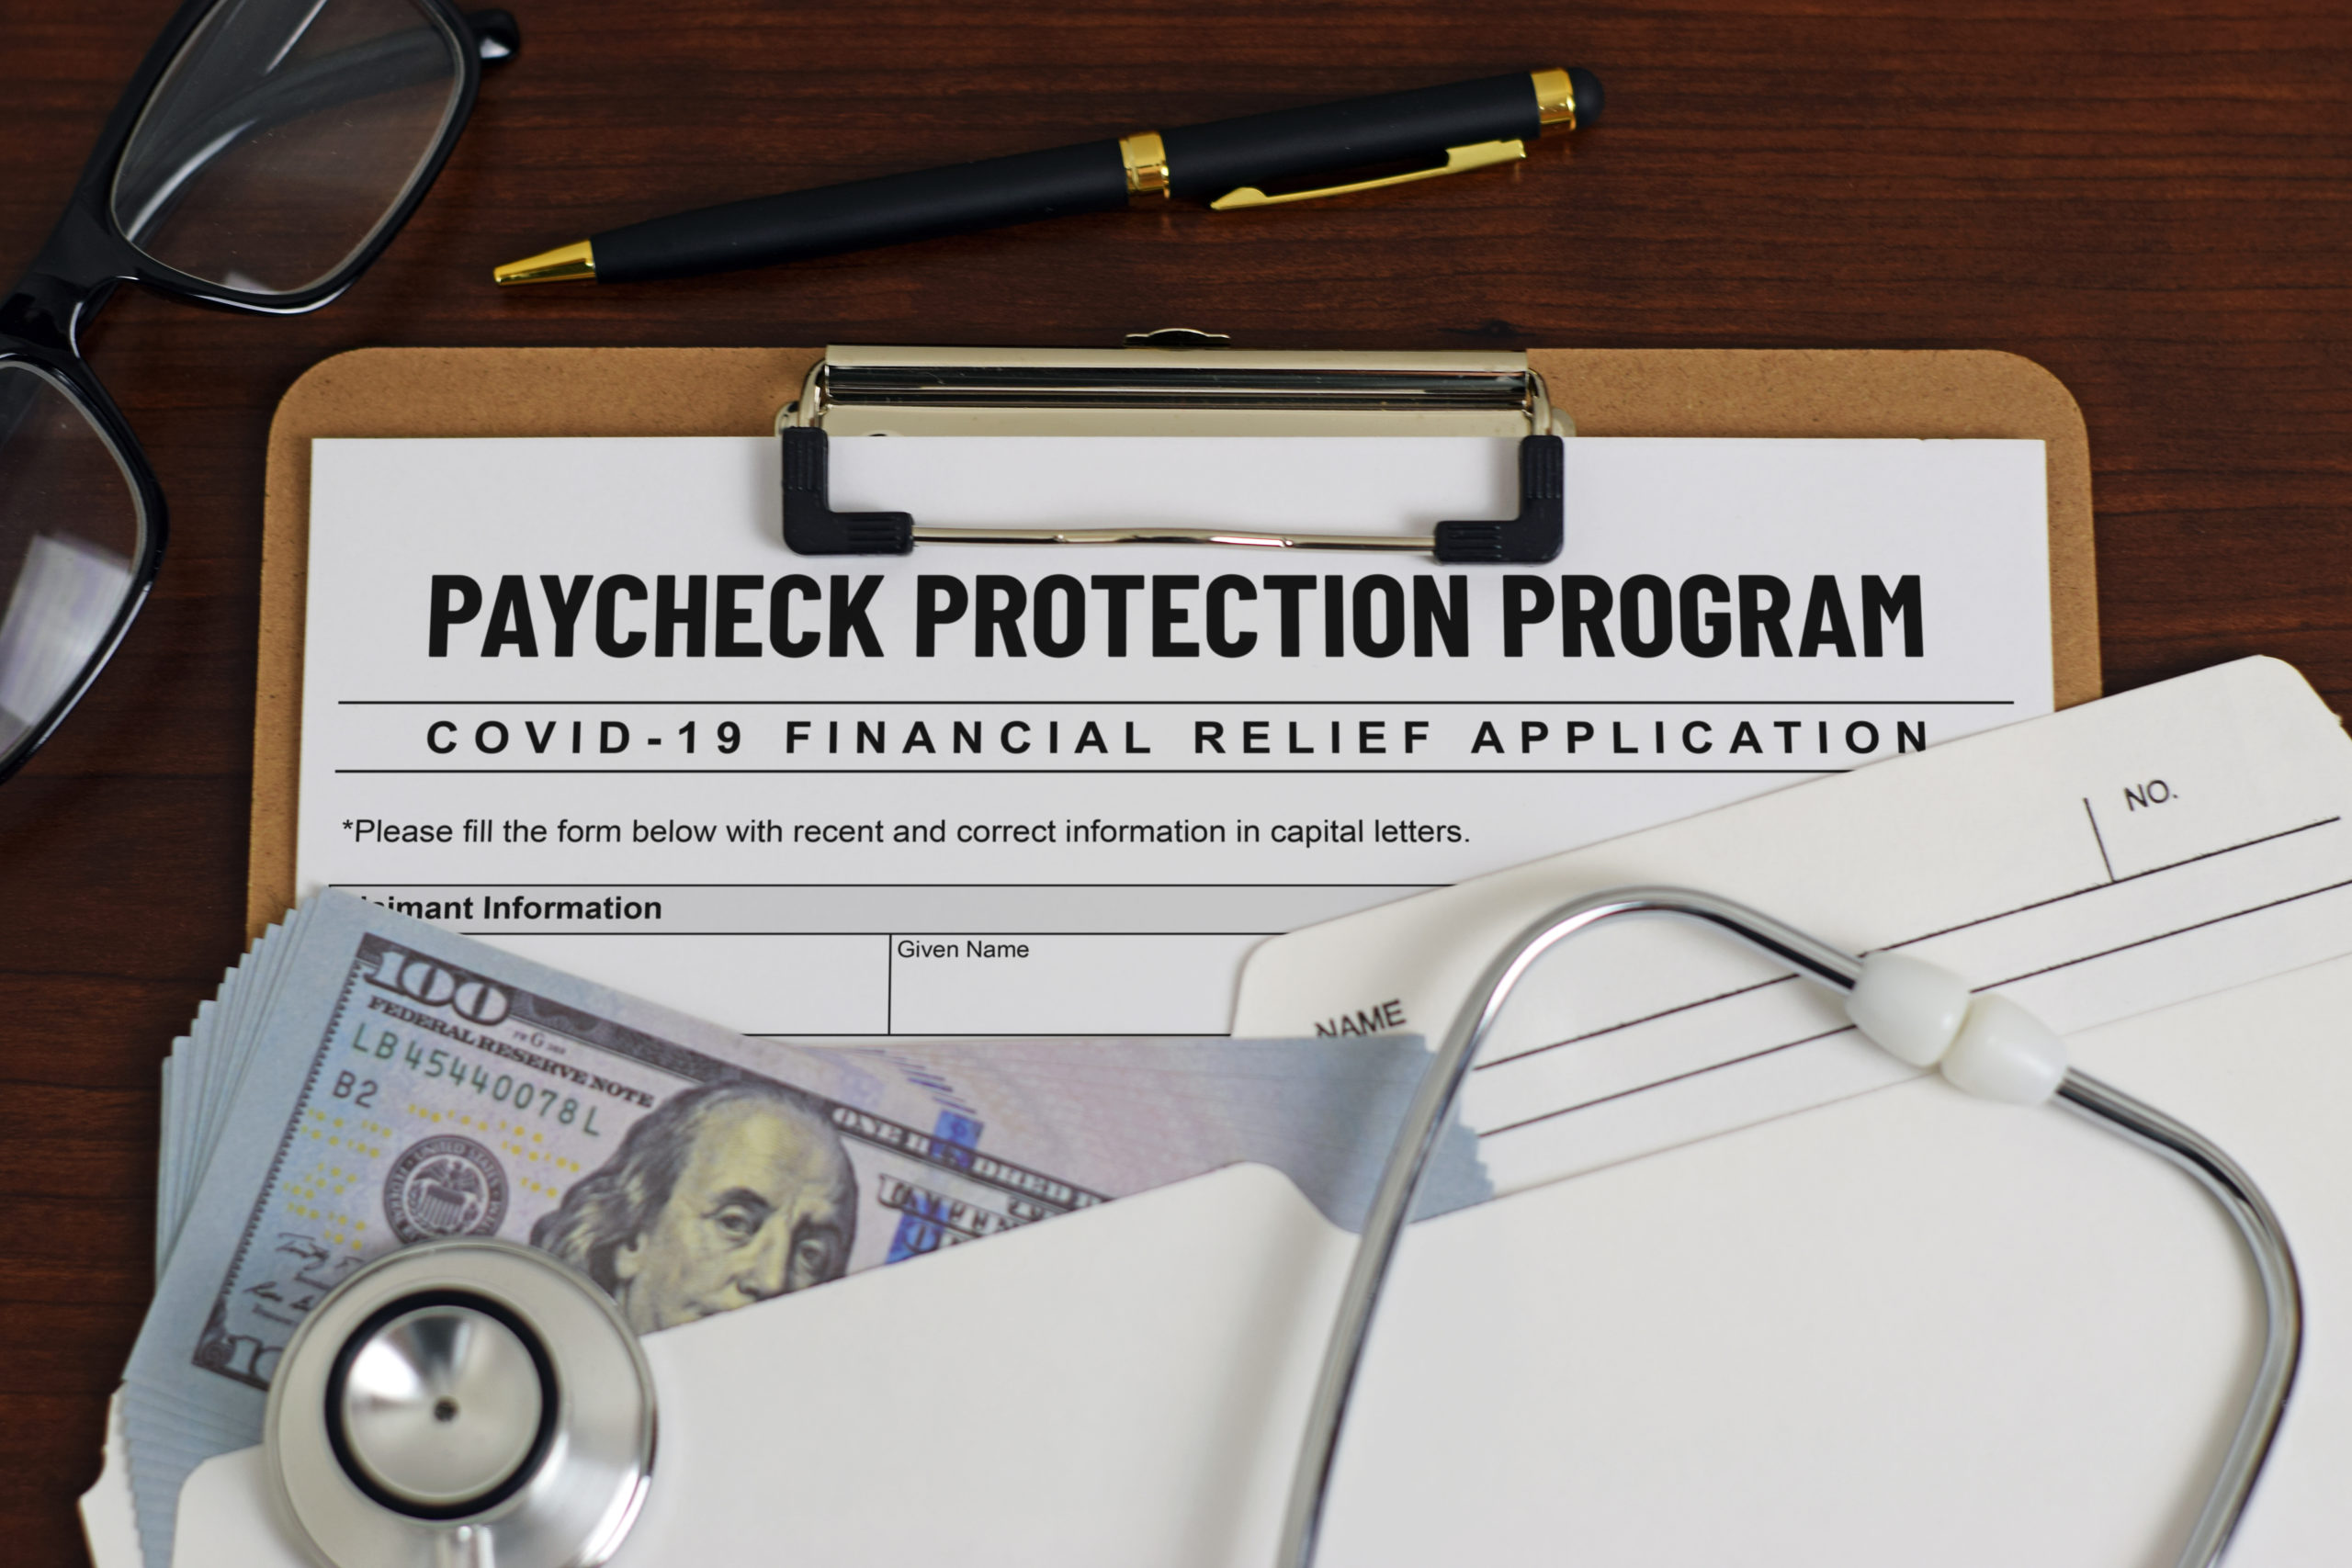 An Overview of the Paycheck Protection Program